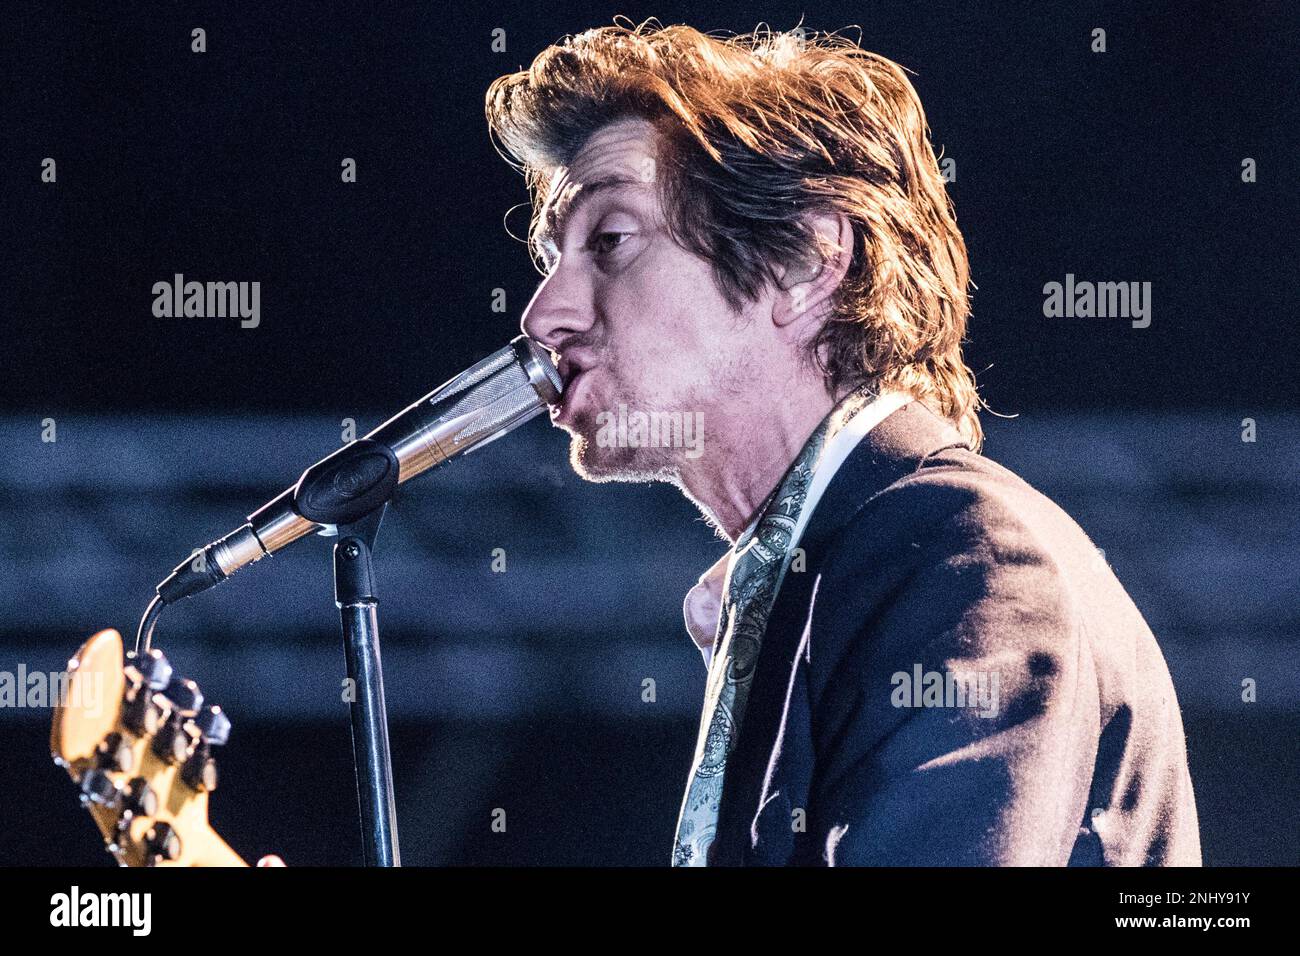 PR - Curitiba - 11/08/2022 - CURITIBA, ARCTIC MONKEYS SHOW - Alex Turner of the band Arctic Monkeys during a presentation at Pedreira Paulo Leminski in the city of Curitiba, this Tuesday (8). British band is on tour in South America. Photo: Robson Mafra/AGIF (via AP) Banque D'Images